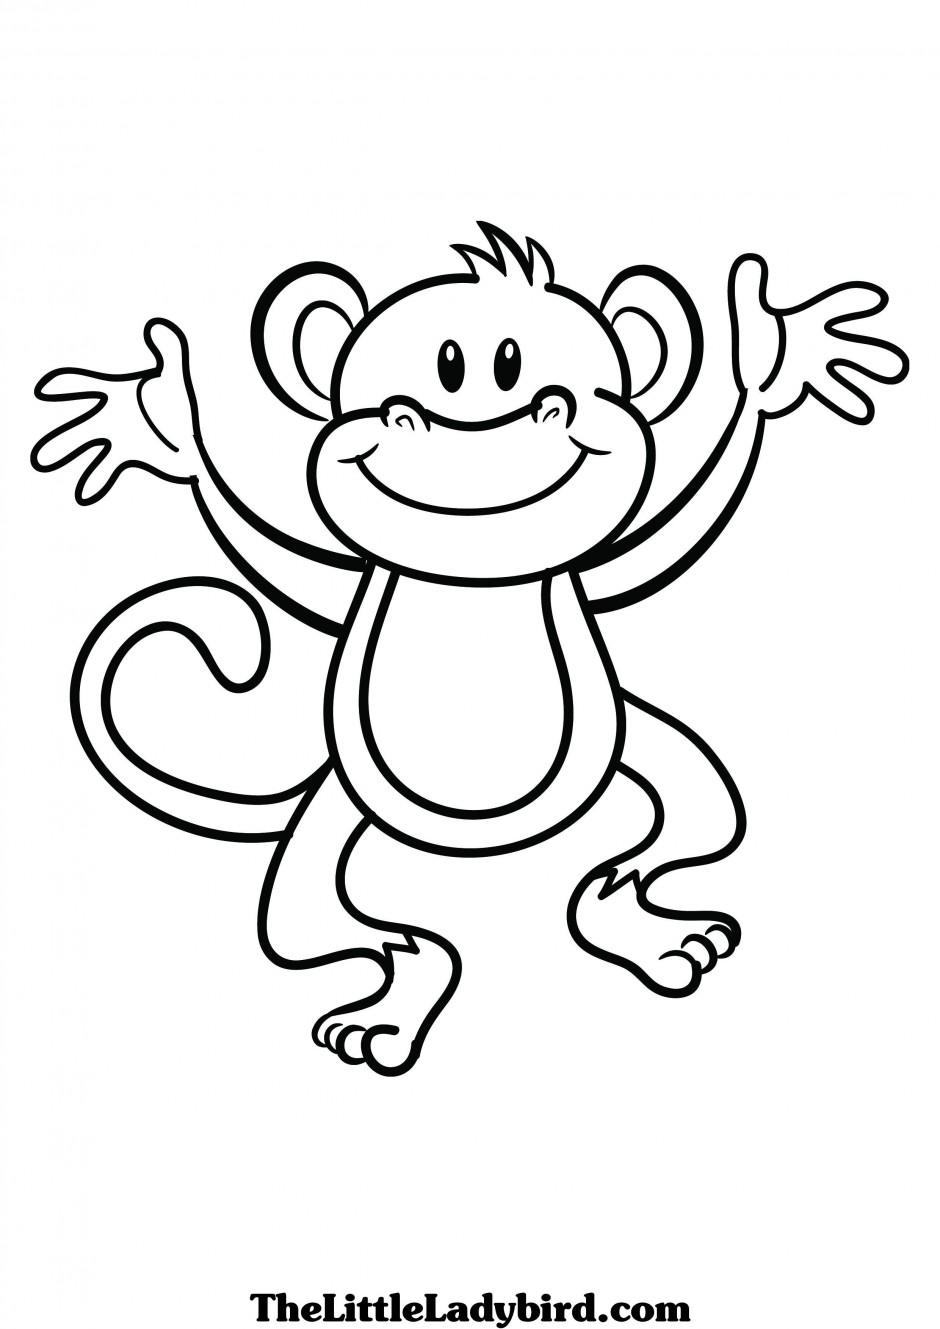 Monkey Clip Art Black And White | Clipart Panda - Free Clipart Images